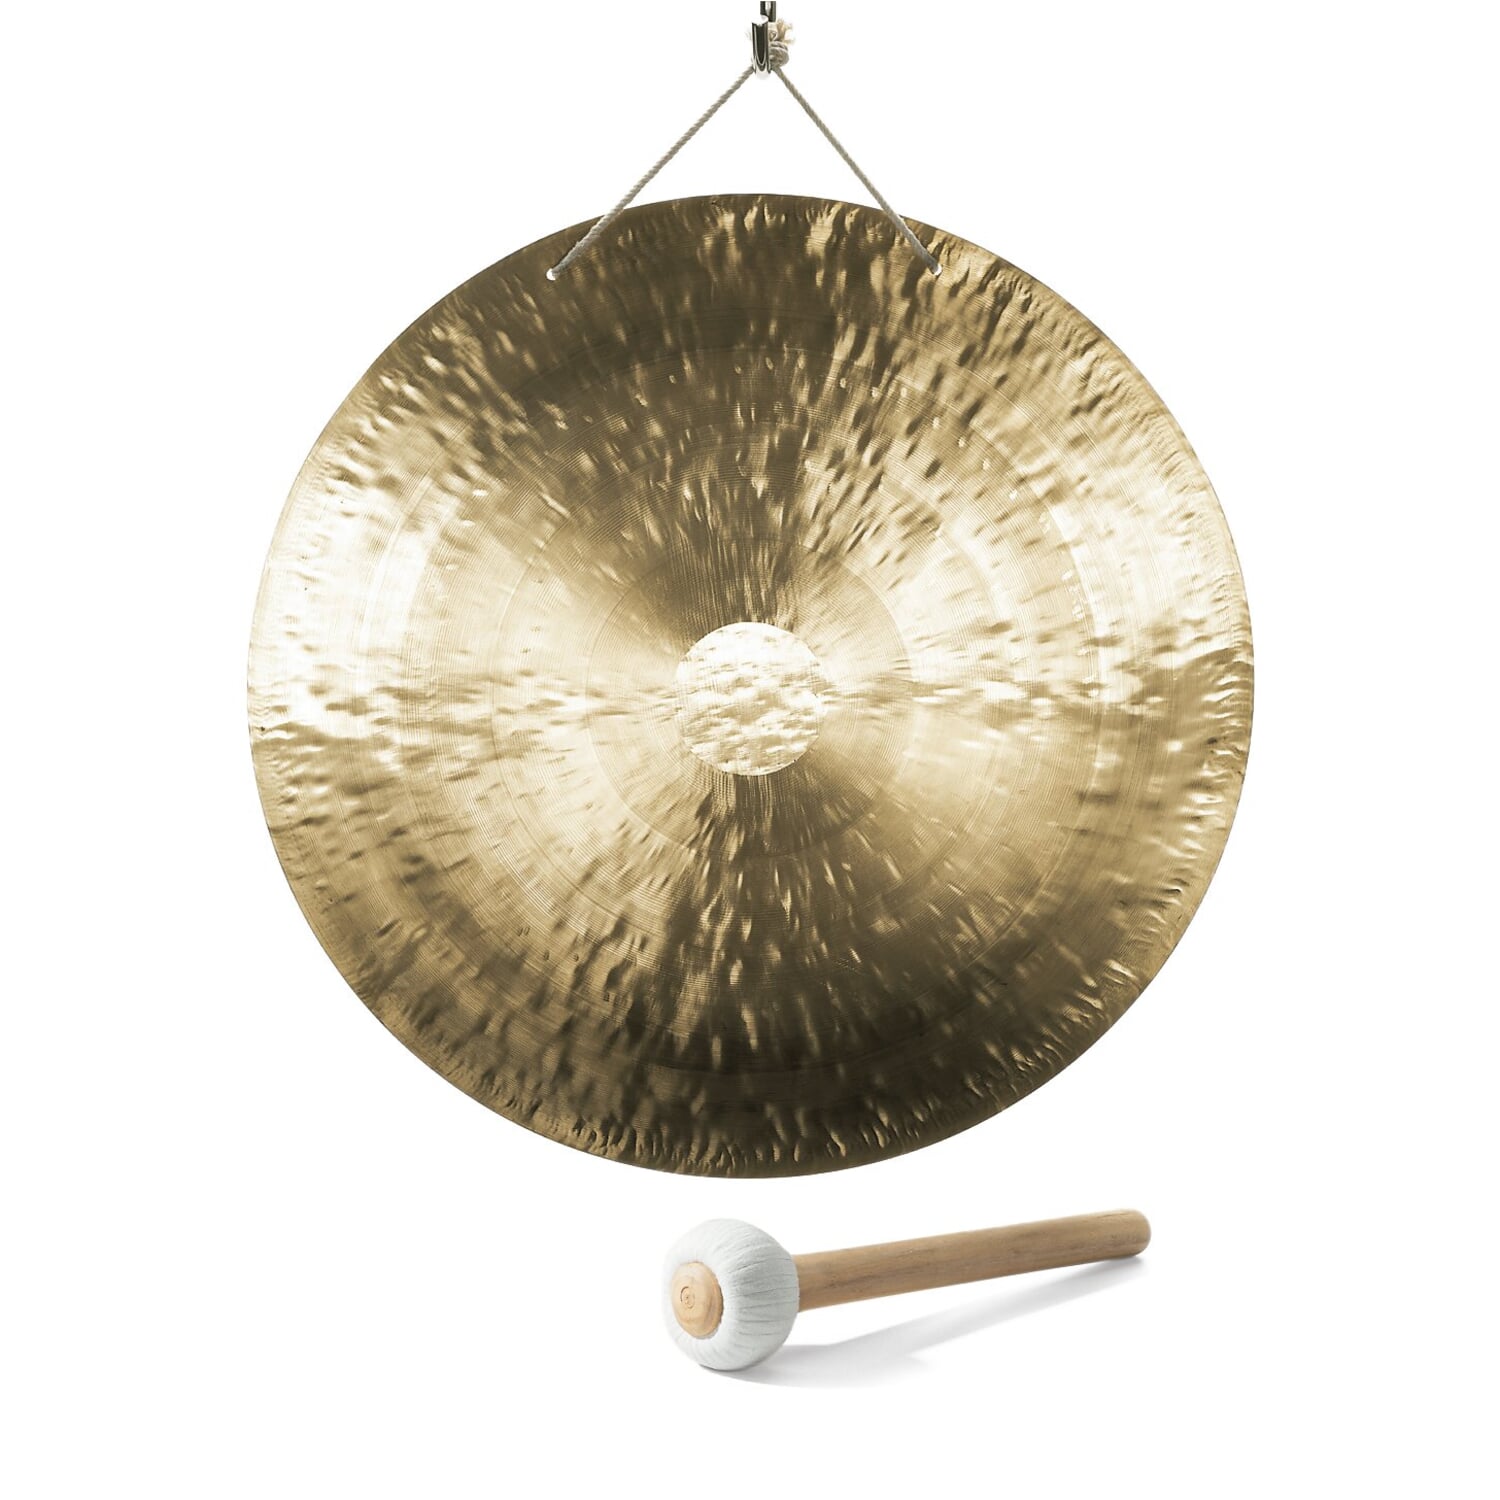 gong for sale uk